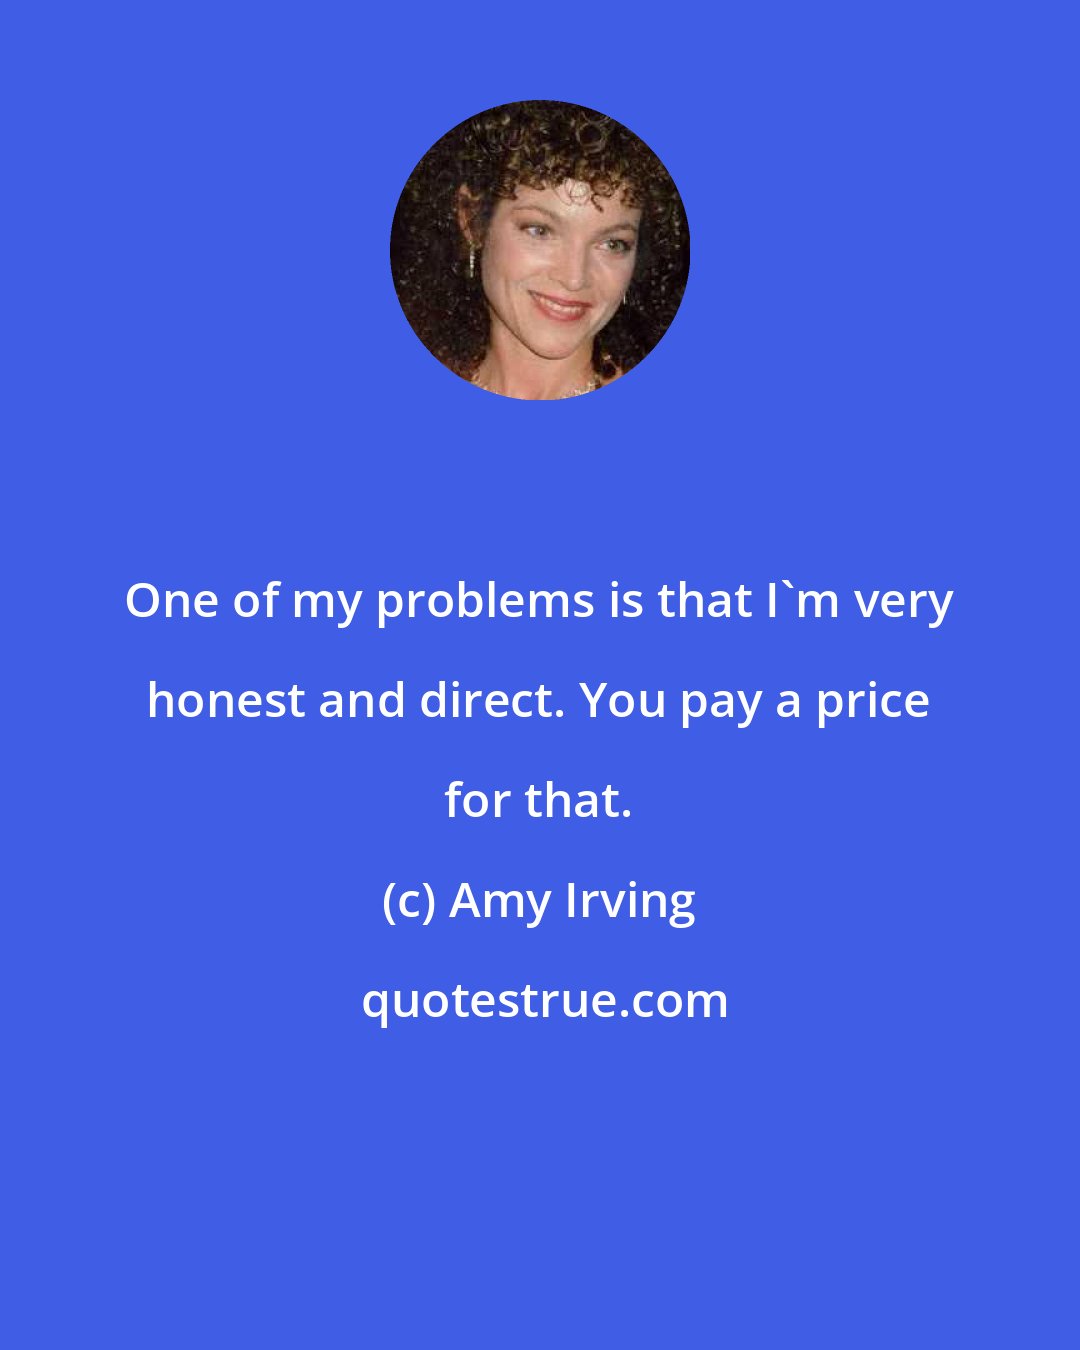 Amy Irving: One of my problems is that I'm very honest and direct. You pay a price for that.